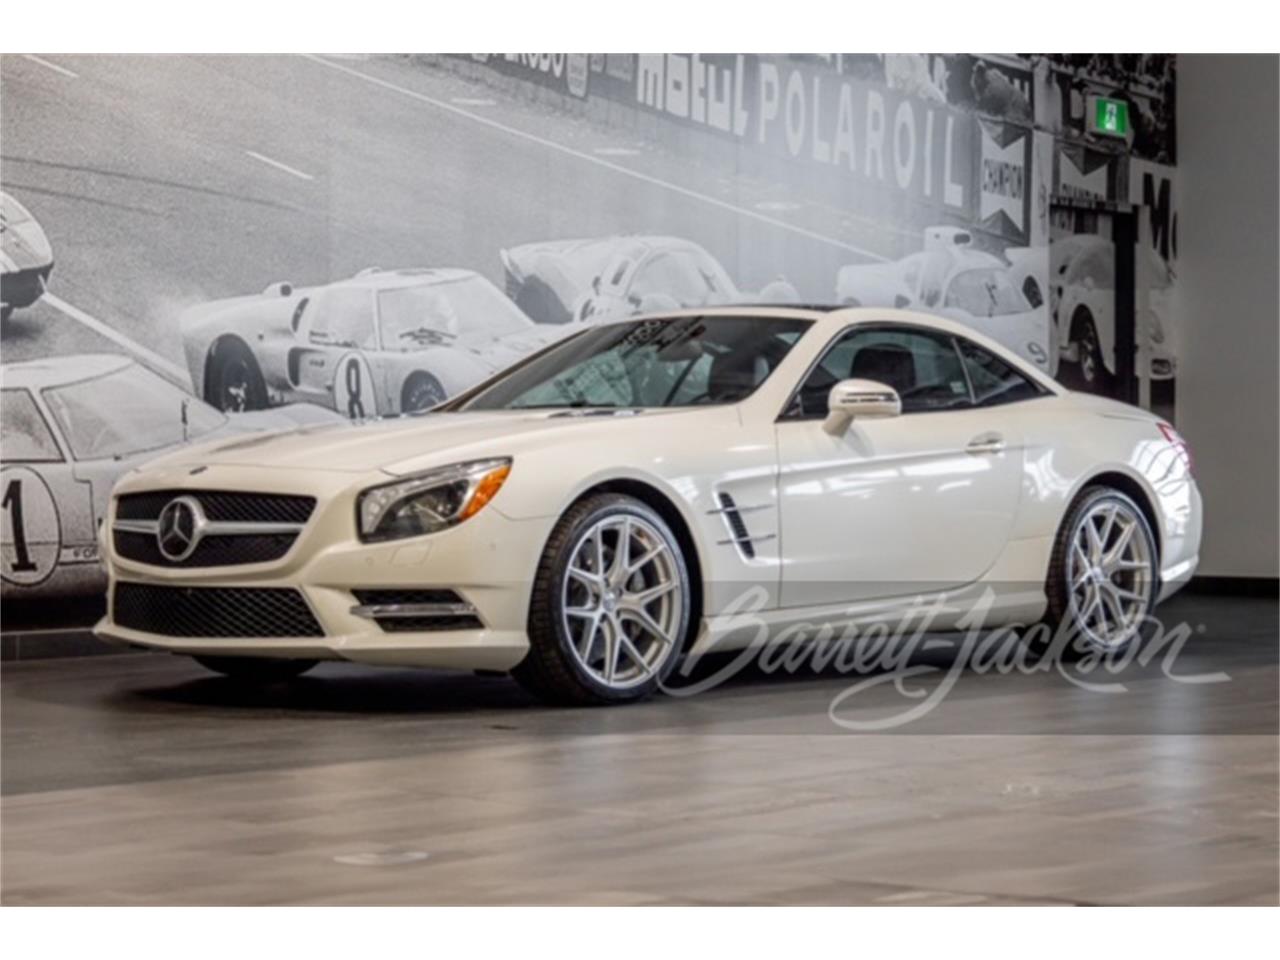 For Sale at Auction: 2014 Mercedes-Benz SL550 in Scottsdale, Arizona for sale in Scottsdale, AZ